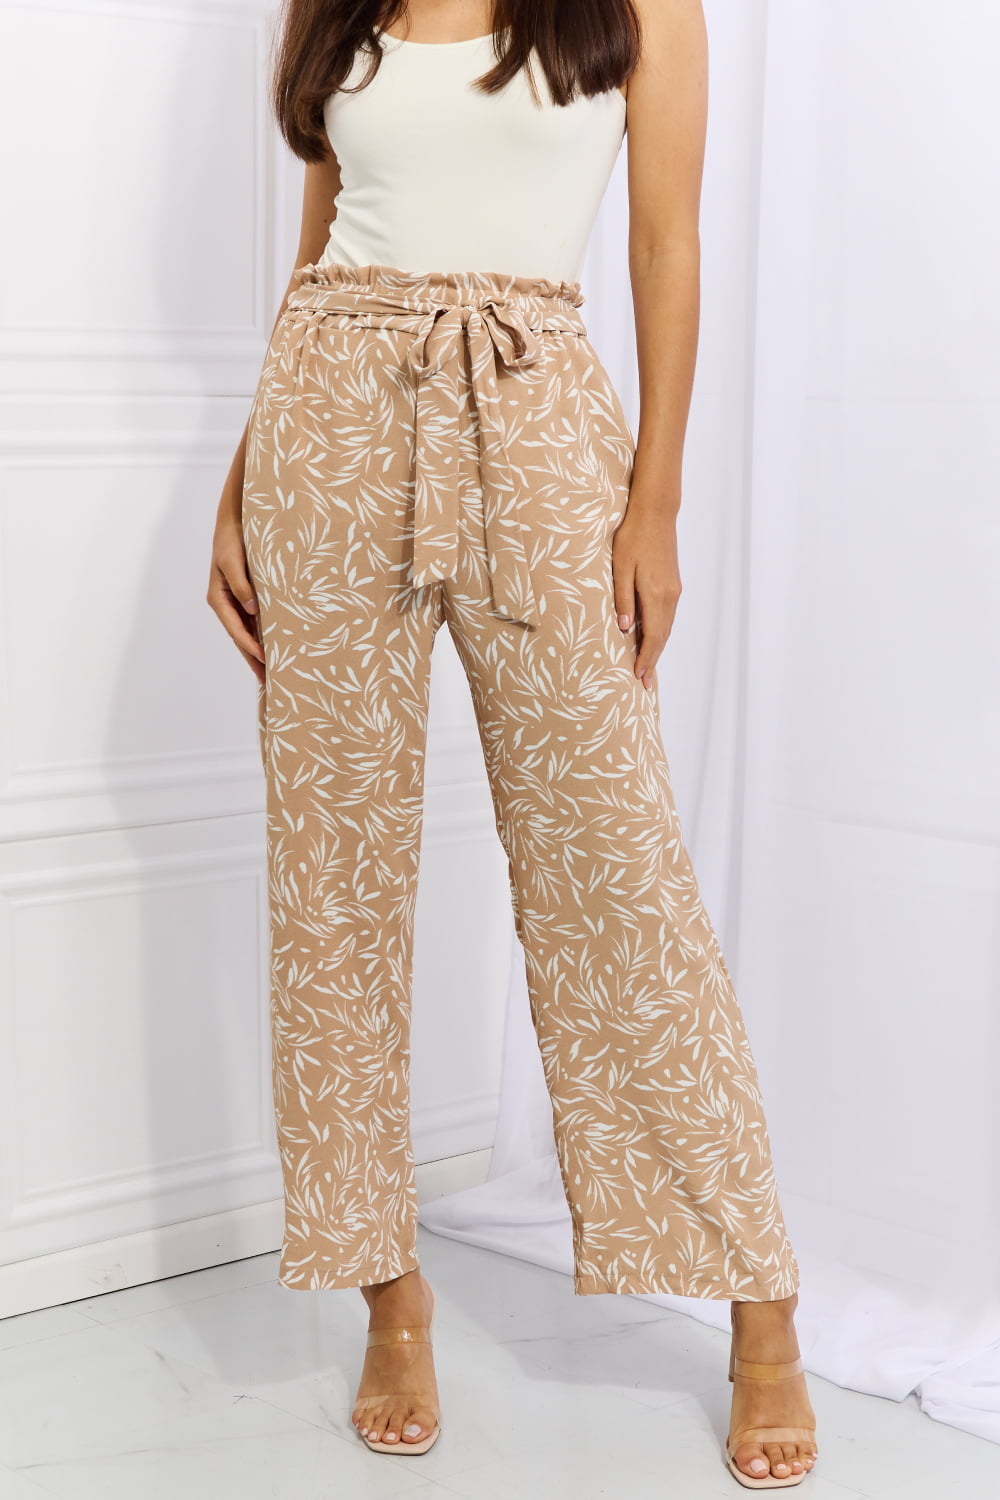 Right Angle Full Size Geometric Printed Pants in Tan - Bottoms - Pants - 3 - 2024